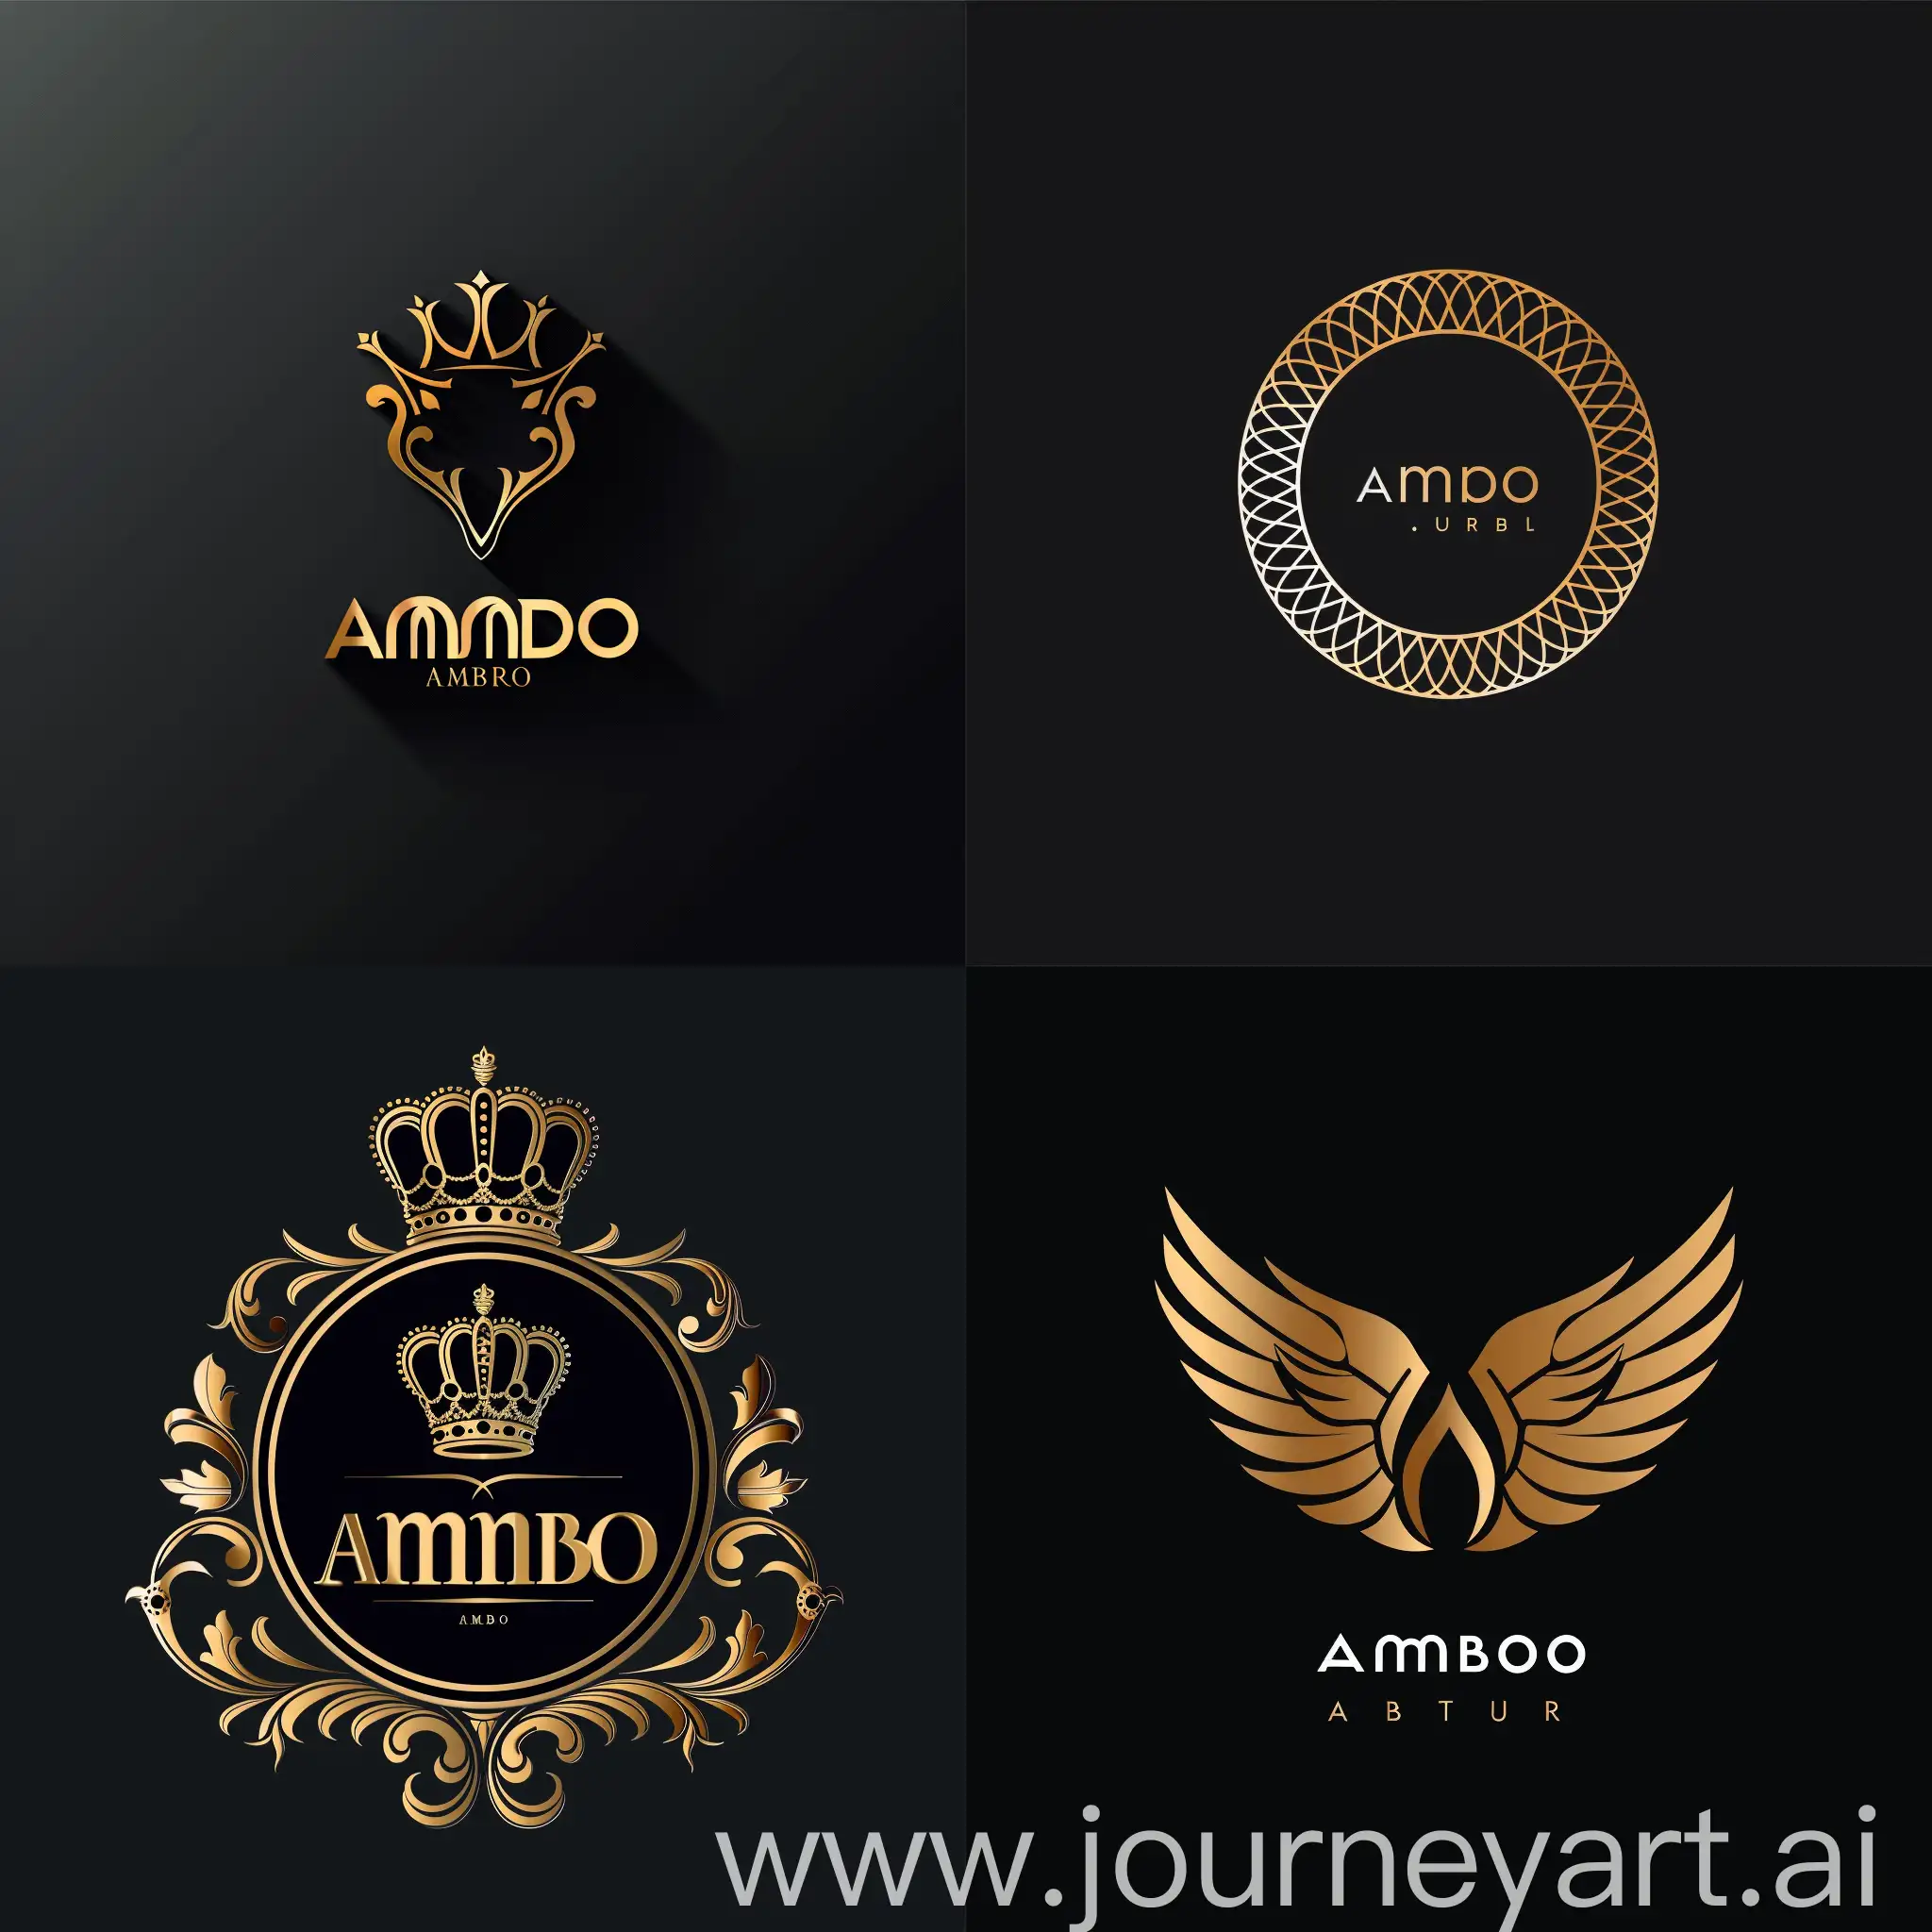 Ambro-Luxury-Logo-Design-with-Abstract-Geometric-Patterns